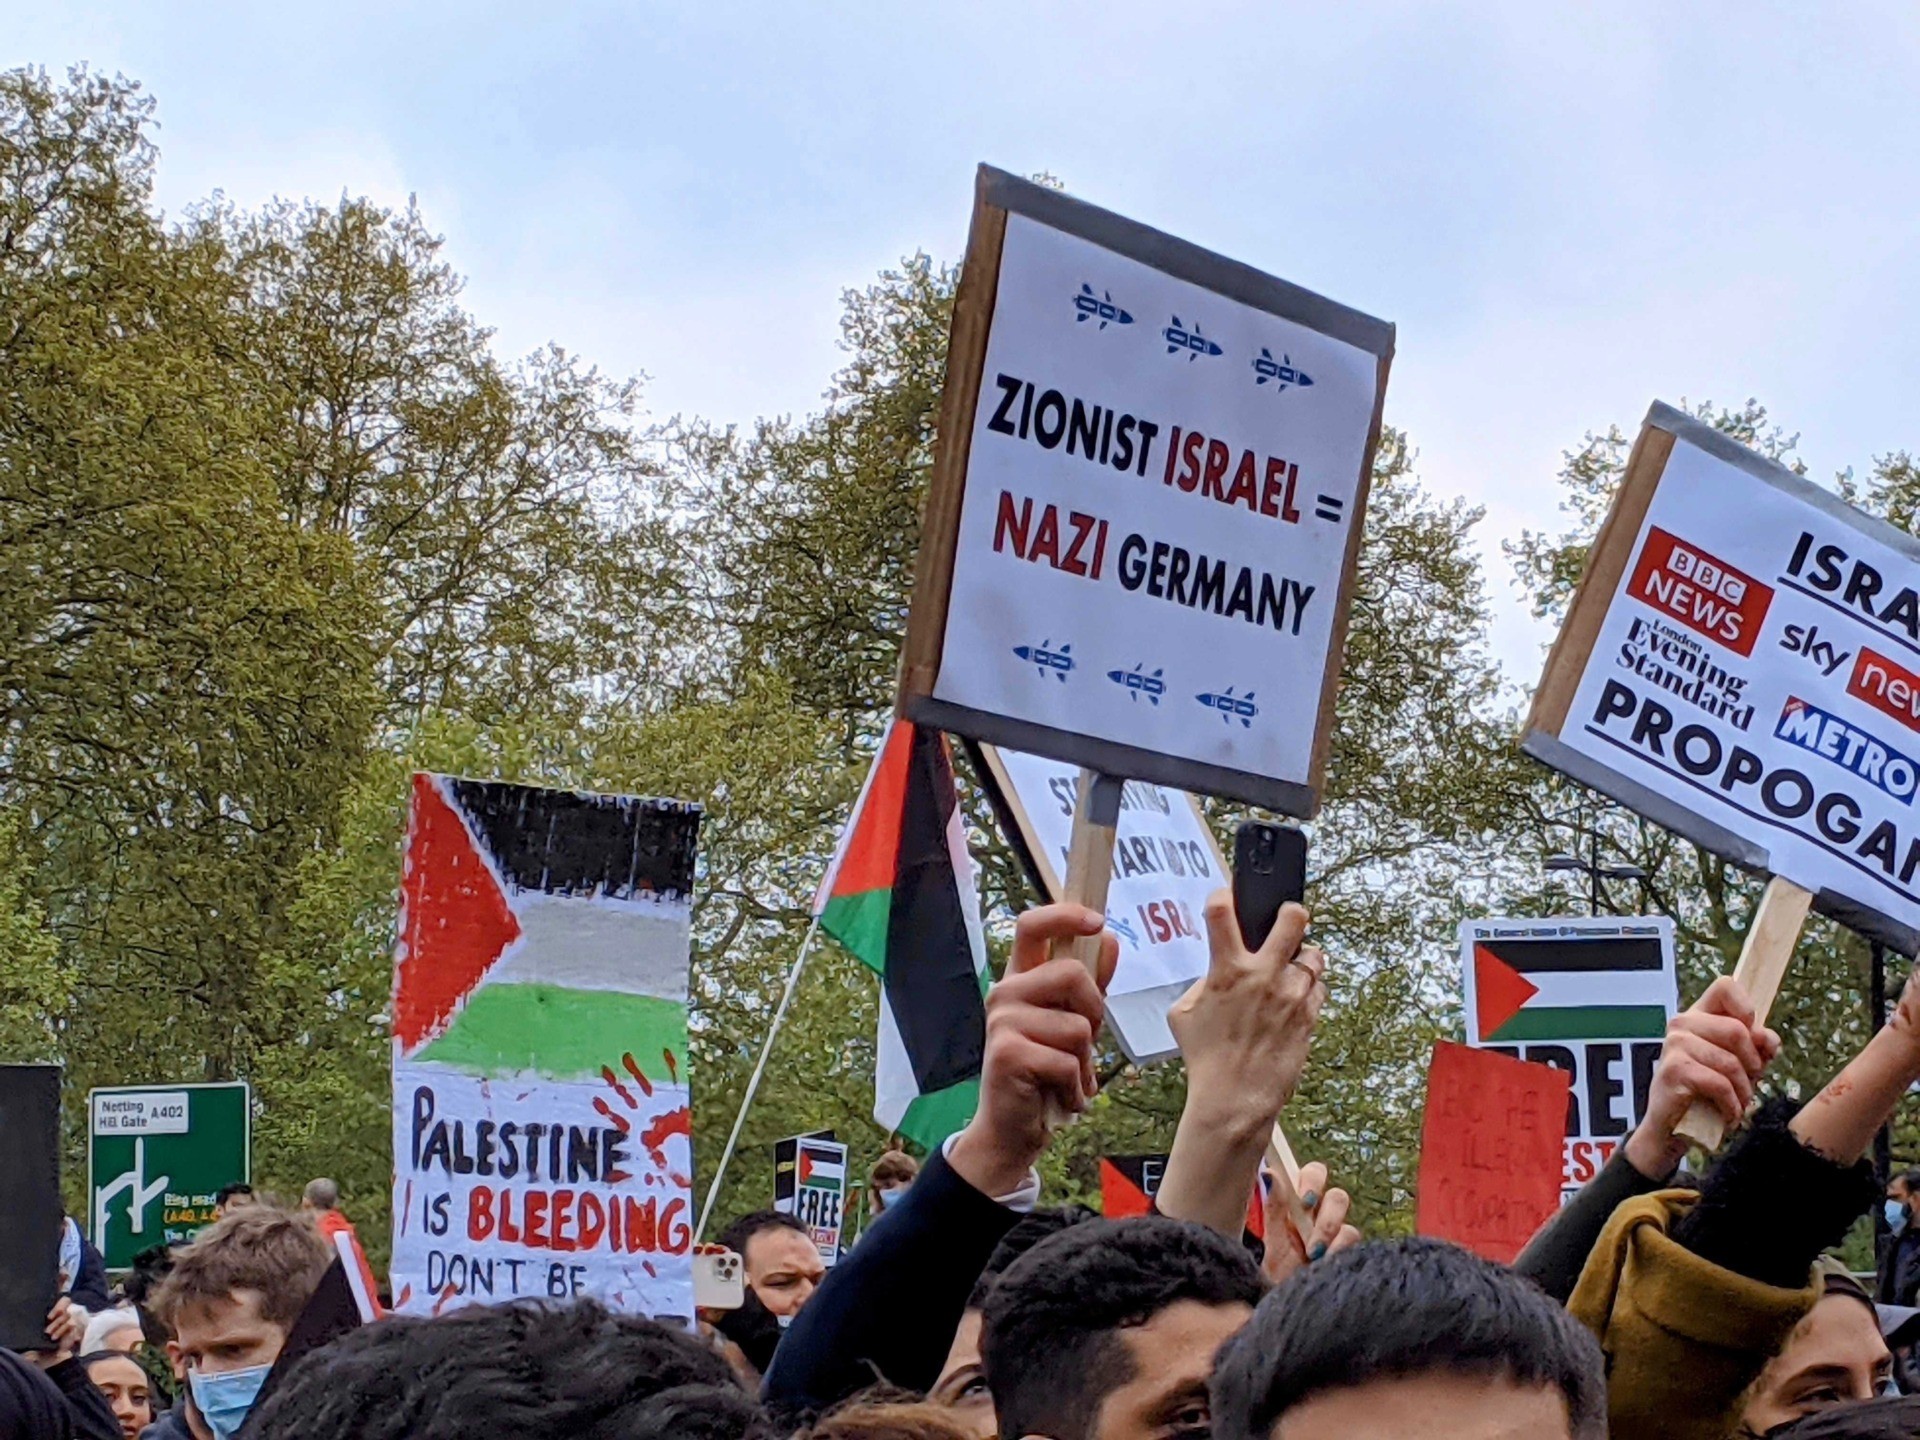 A protester is seen carrying a placard reading "Zionist Israel=Nazi Germany", at an anti-Israel protest in London. May 15th, 2021. Kurt Zindulka, Breitbart News